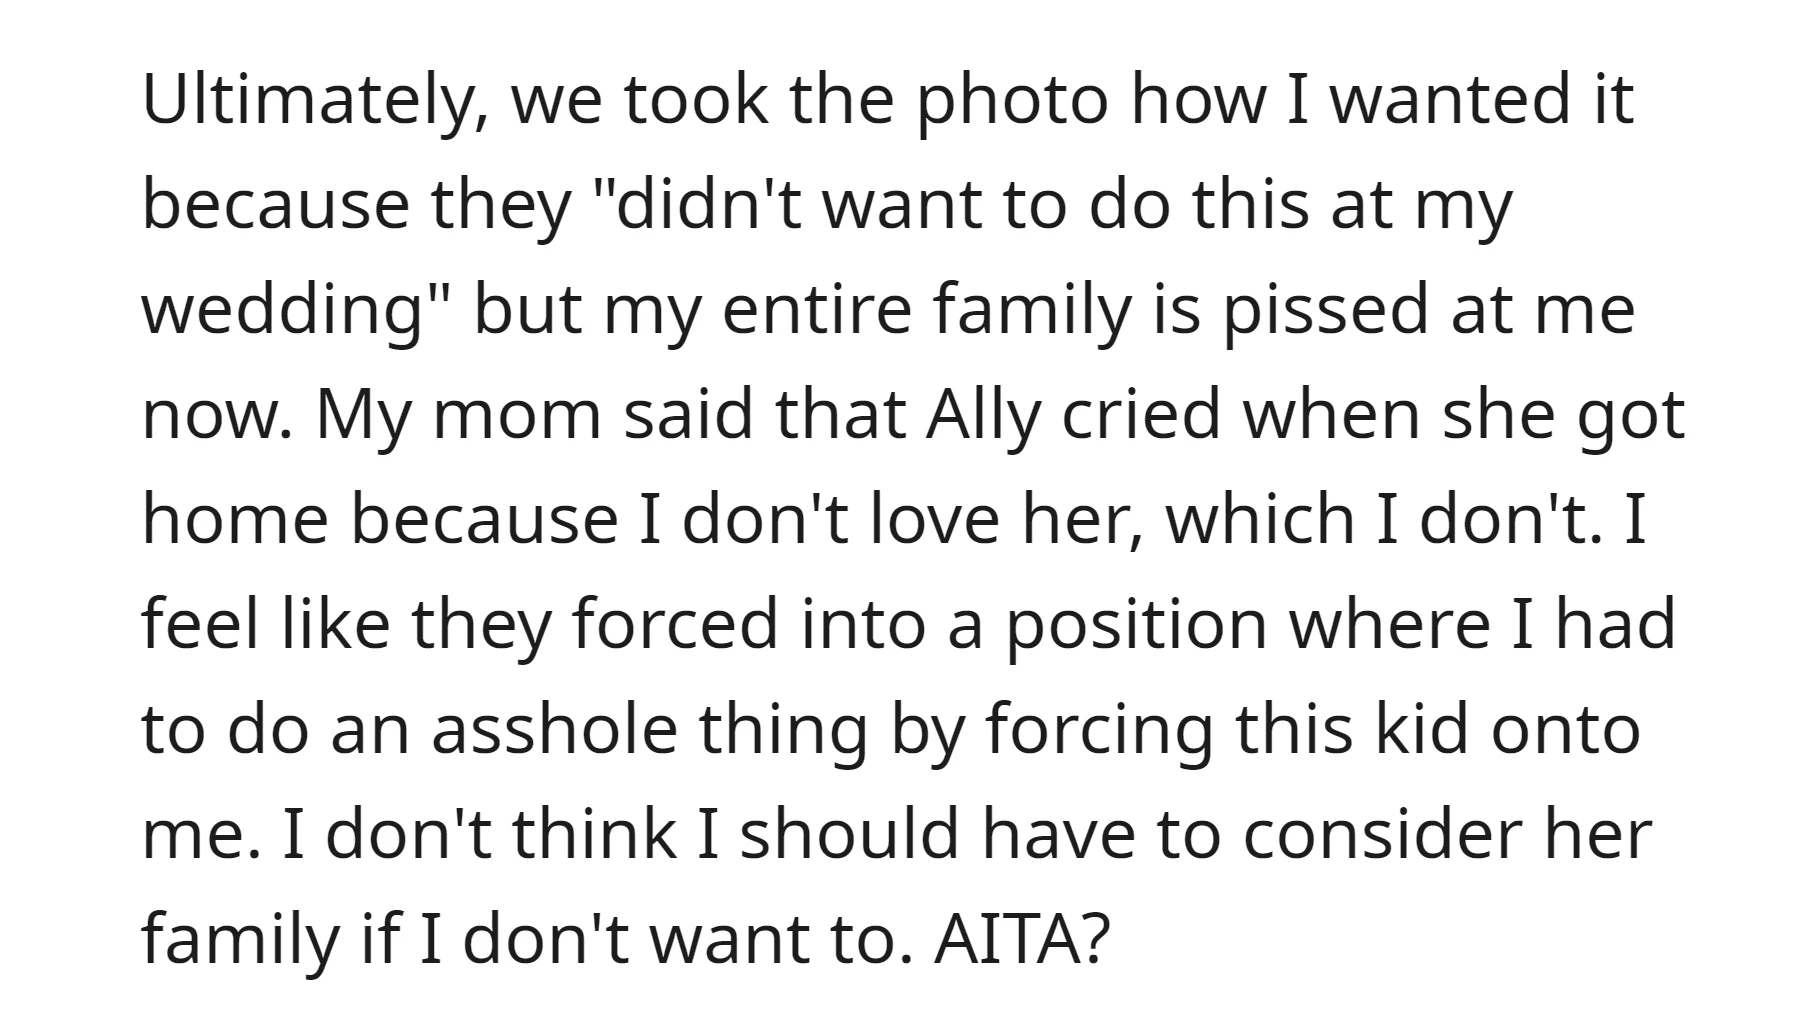 OP faced family backlash after insisting on a wedding photo without Ally